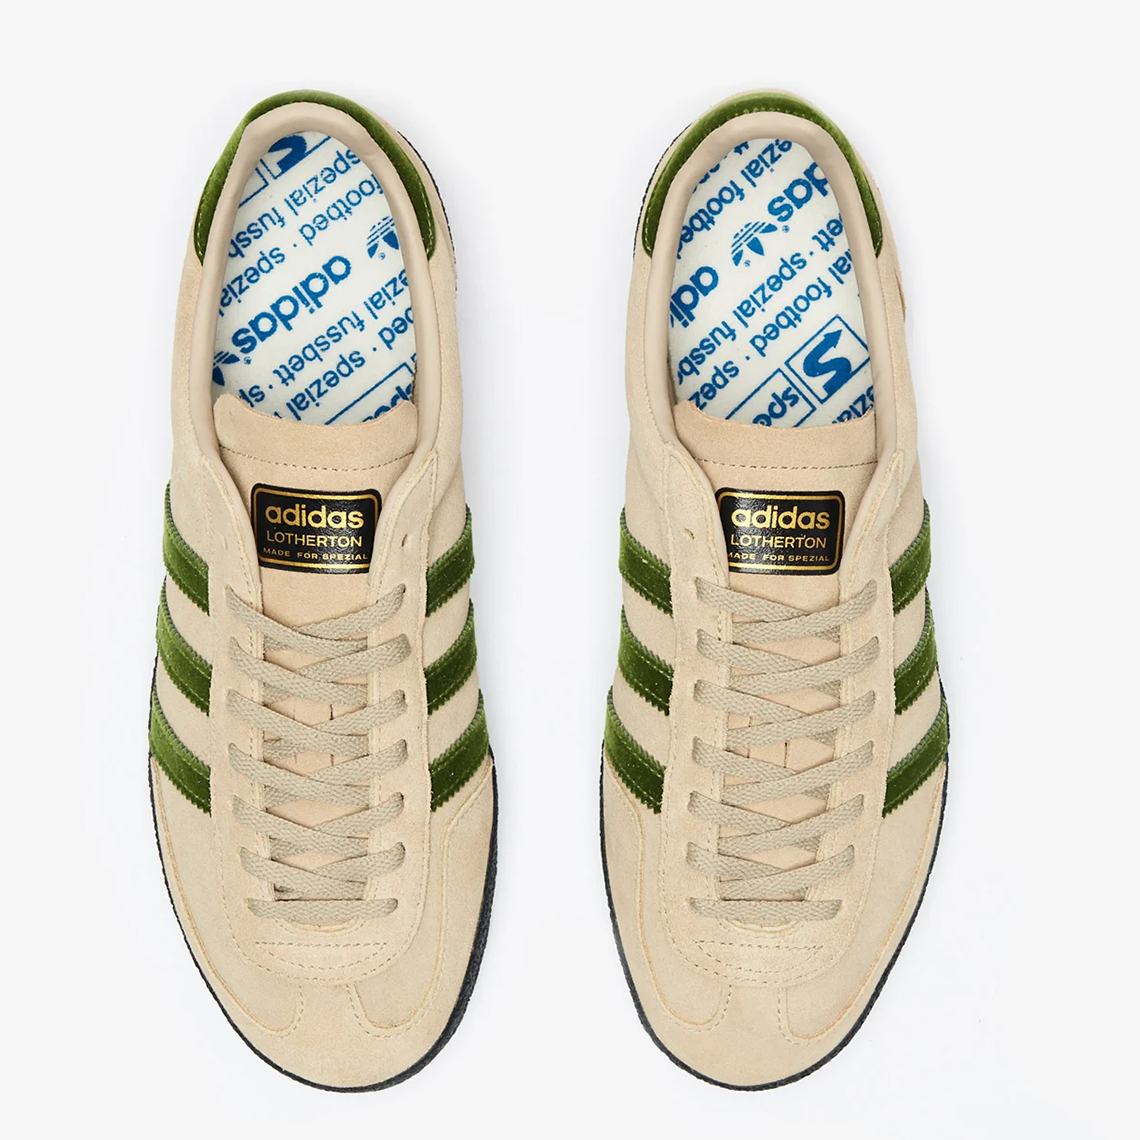 adidas Spezial Delivers Refreshed 